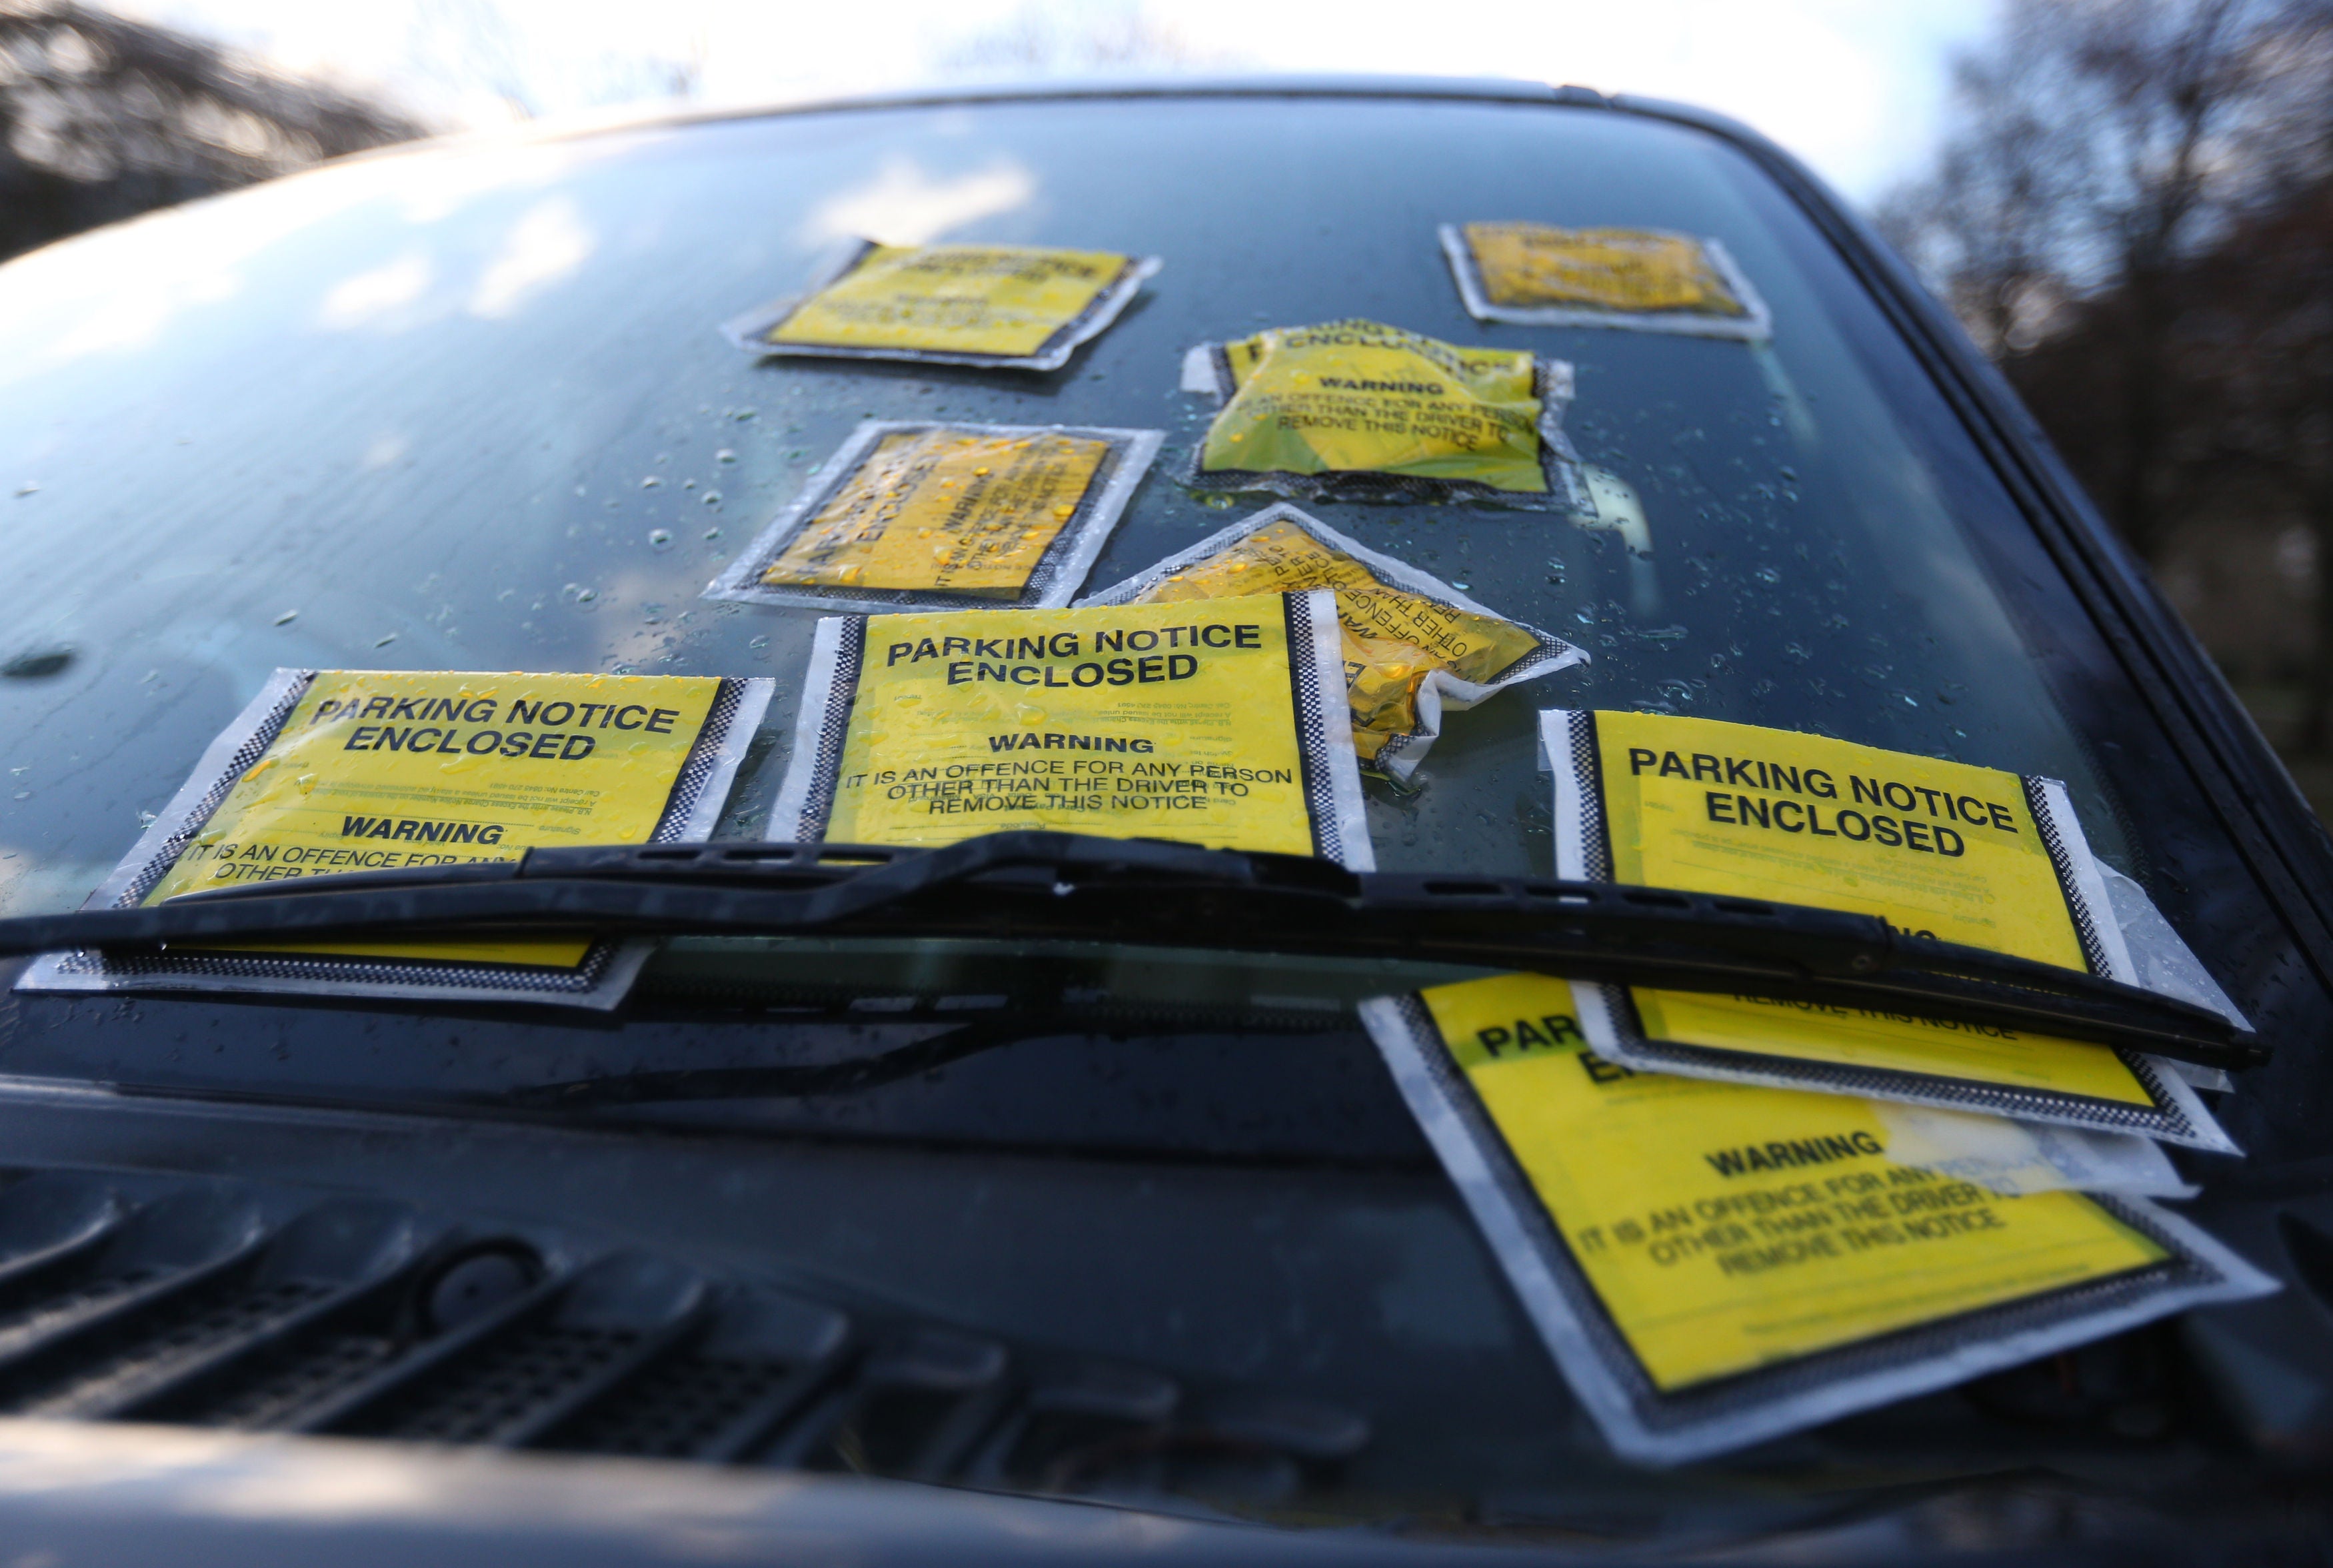 Higher financial penalties of ?70 and ?100 will remain for more serious breaches of the rules, such as parking in Blue Badge bays.